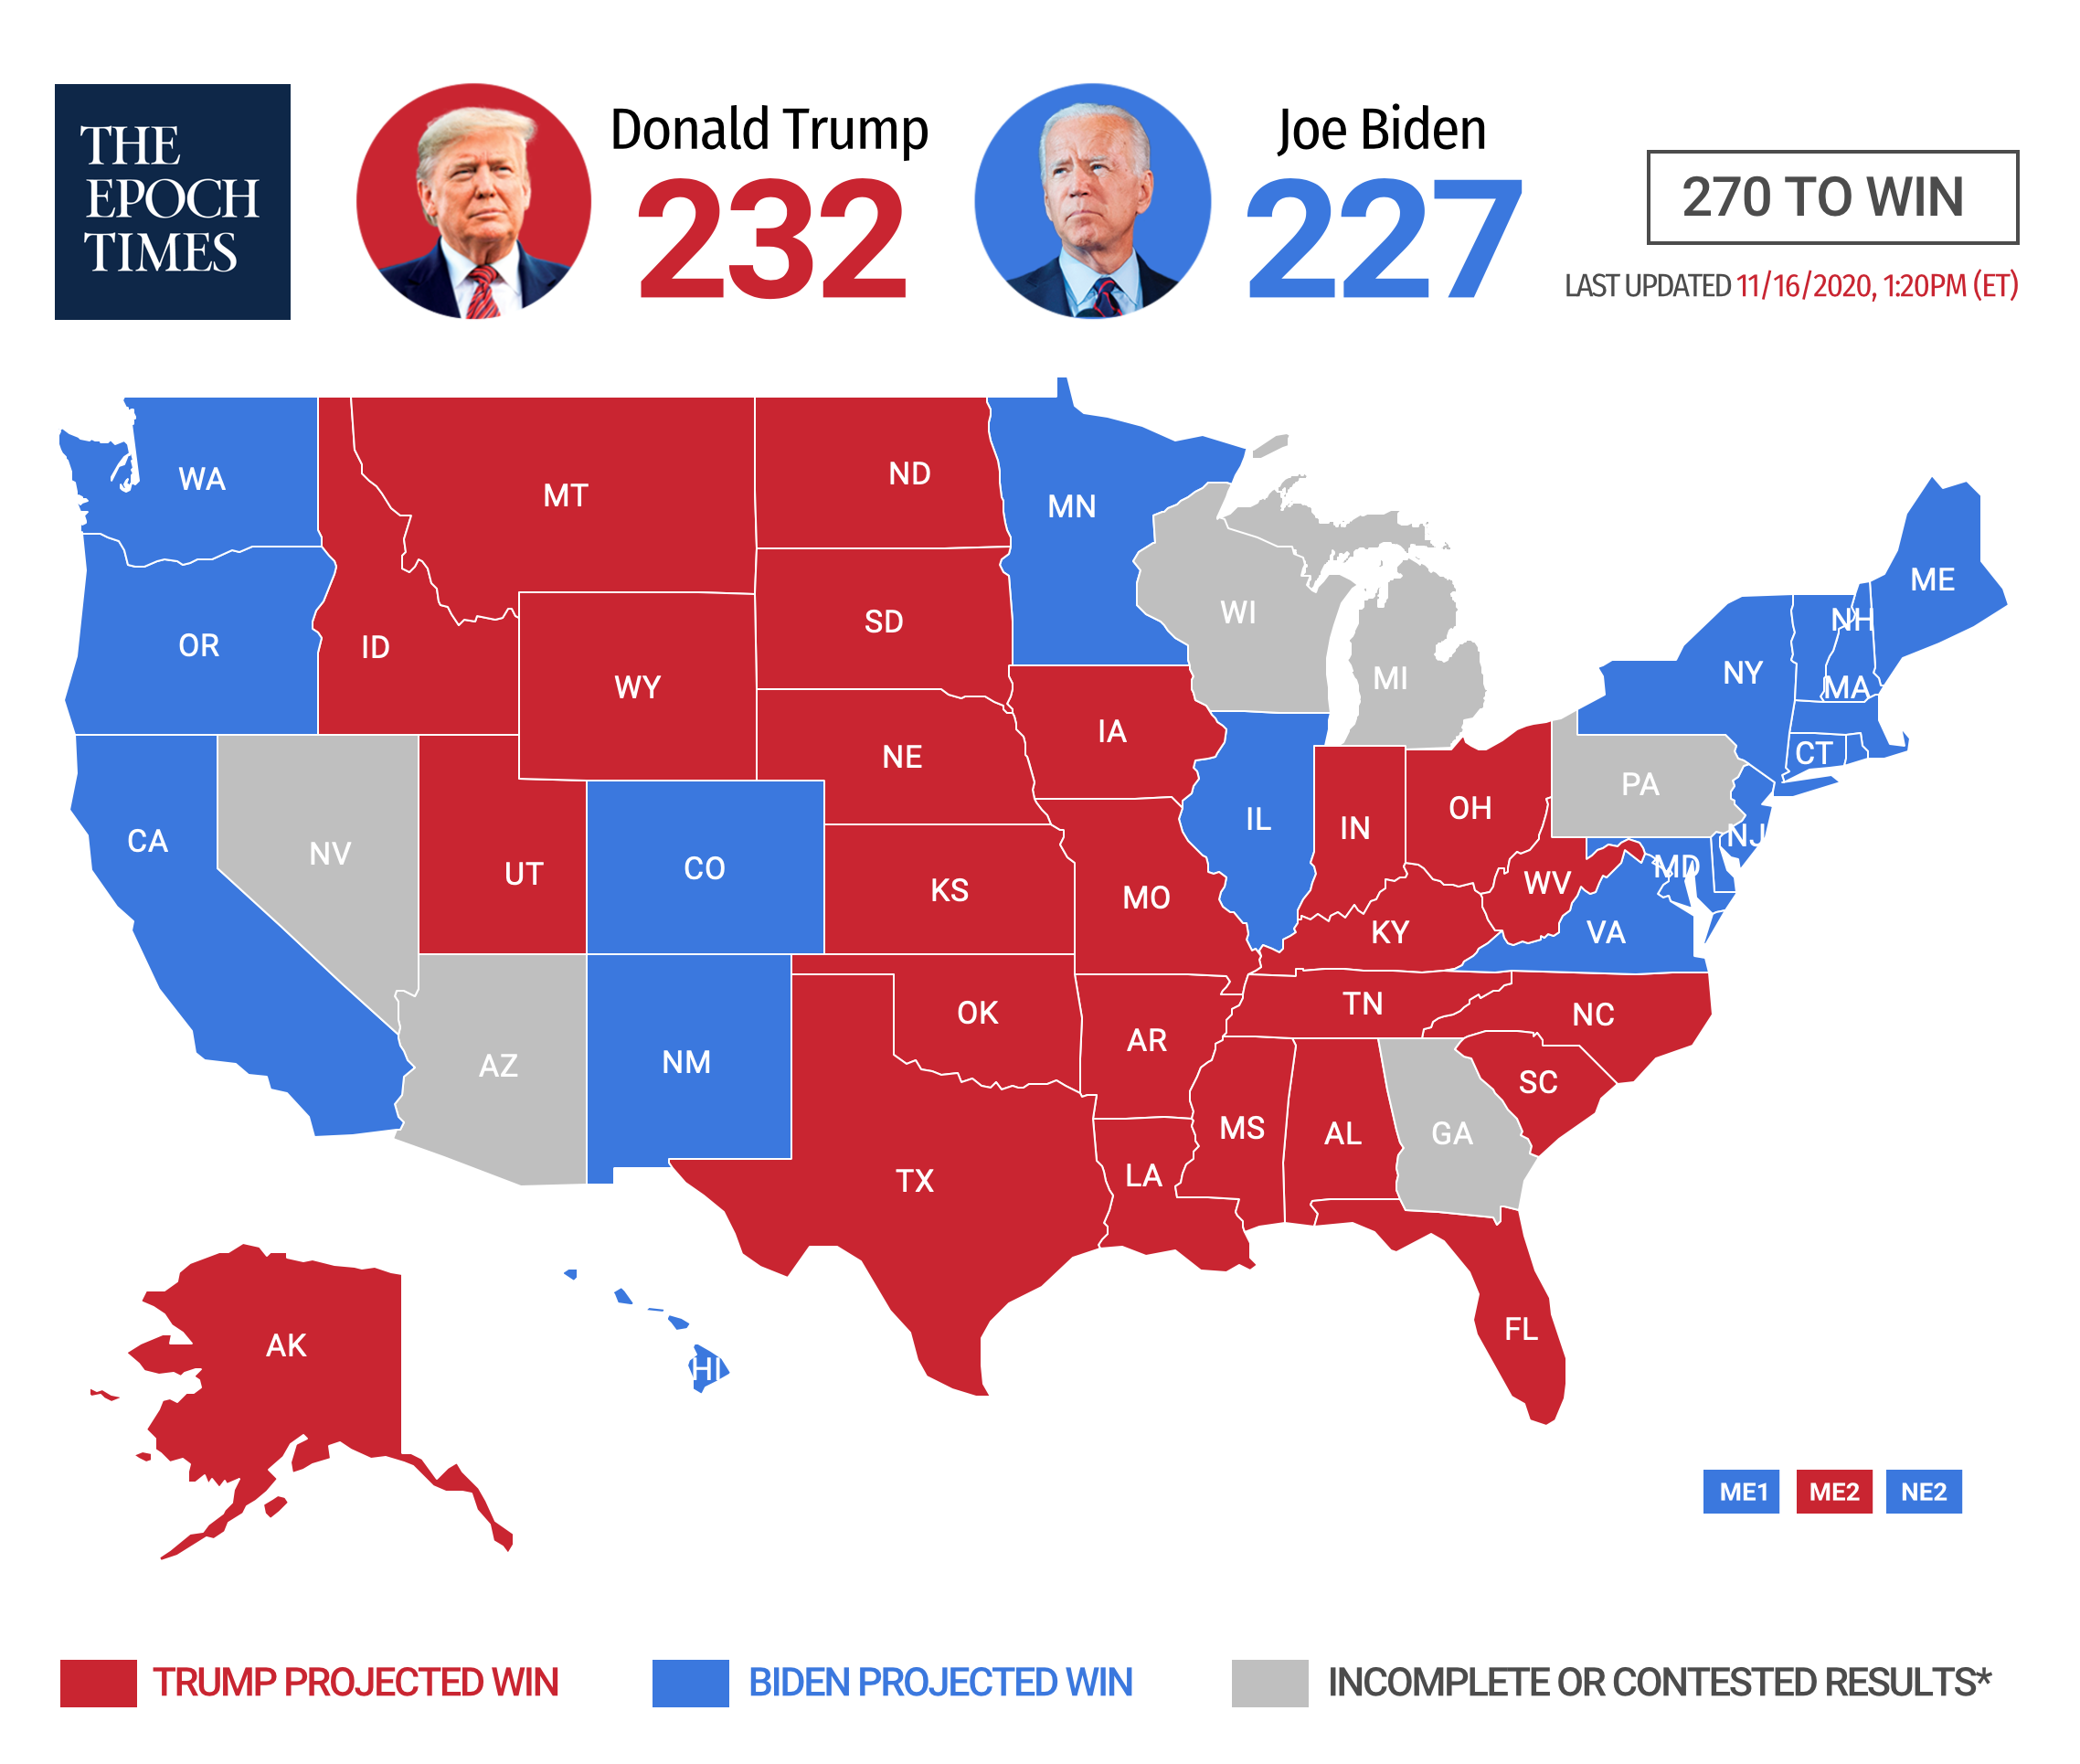 Red State Vs Blue State Map 2024 United States Map